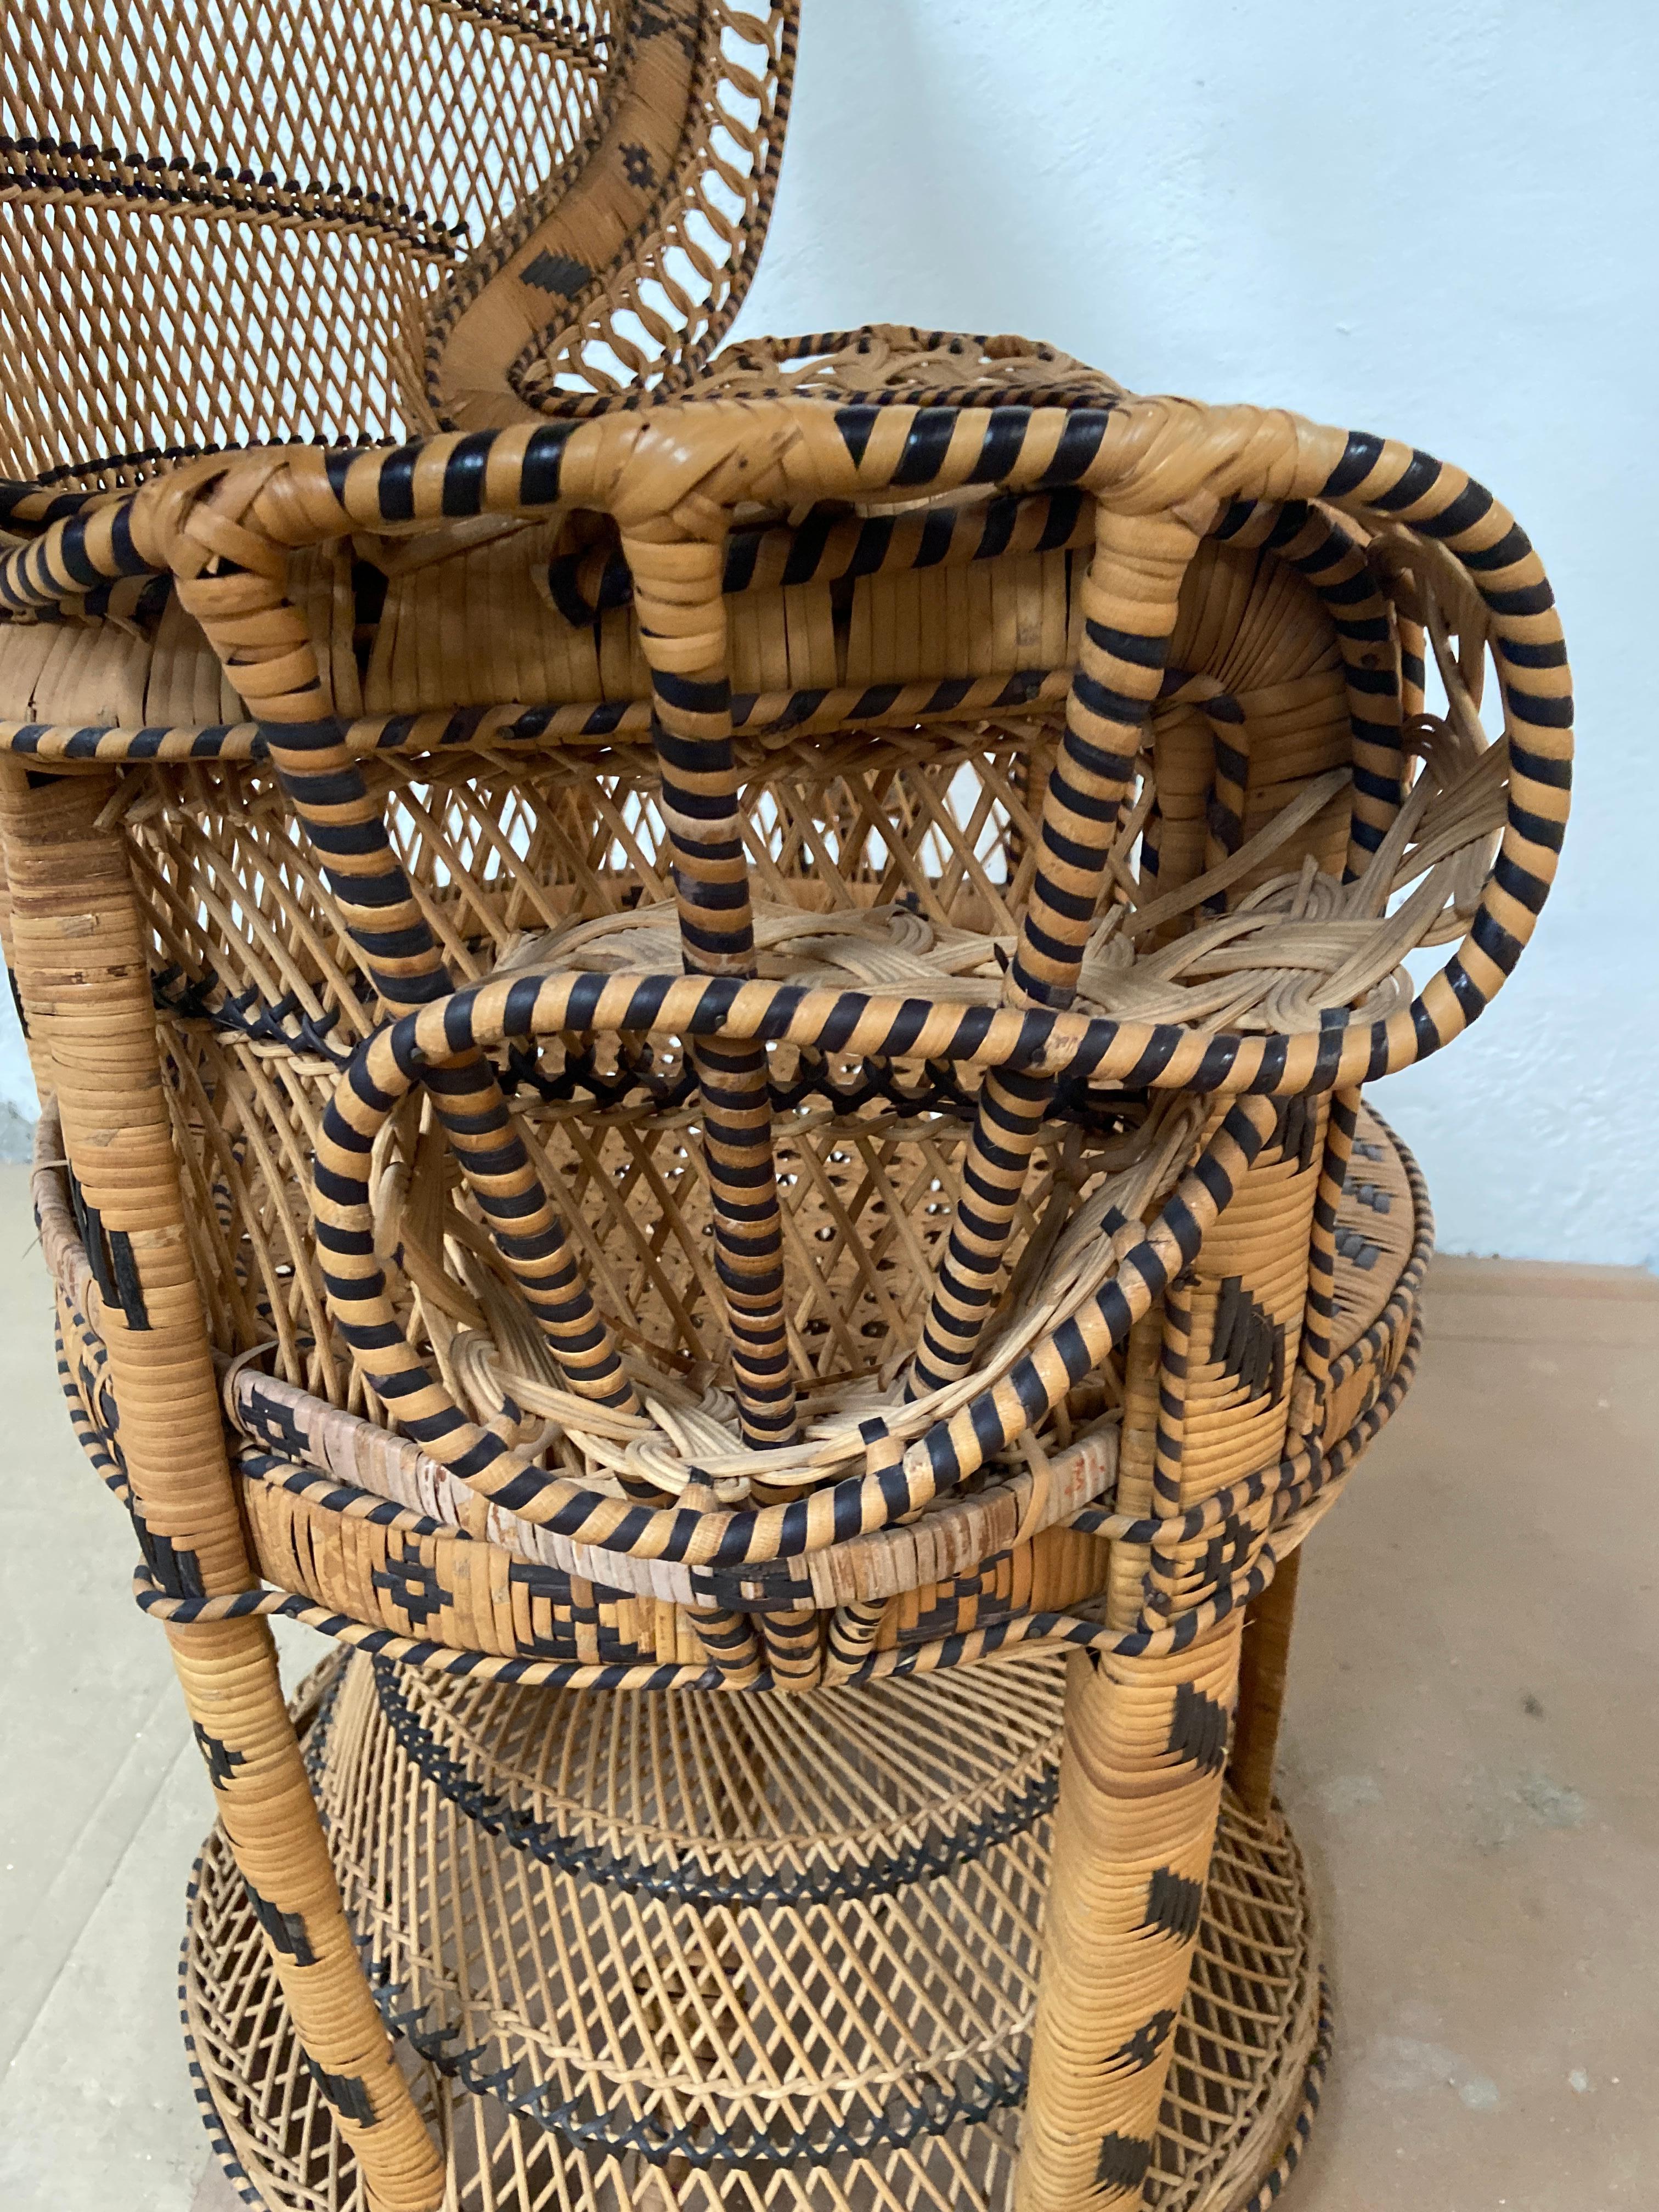 Late 20th Century Mid-Century Modern Rattan and Wicker Peacock Emanuelle Chair, 1970s